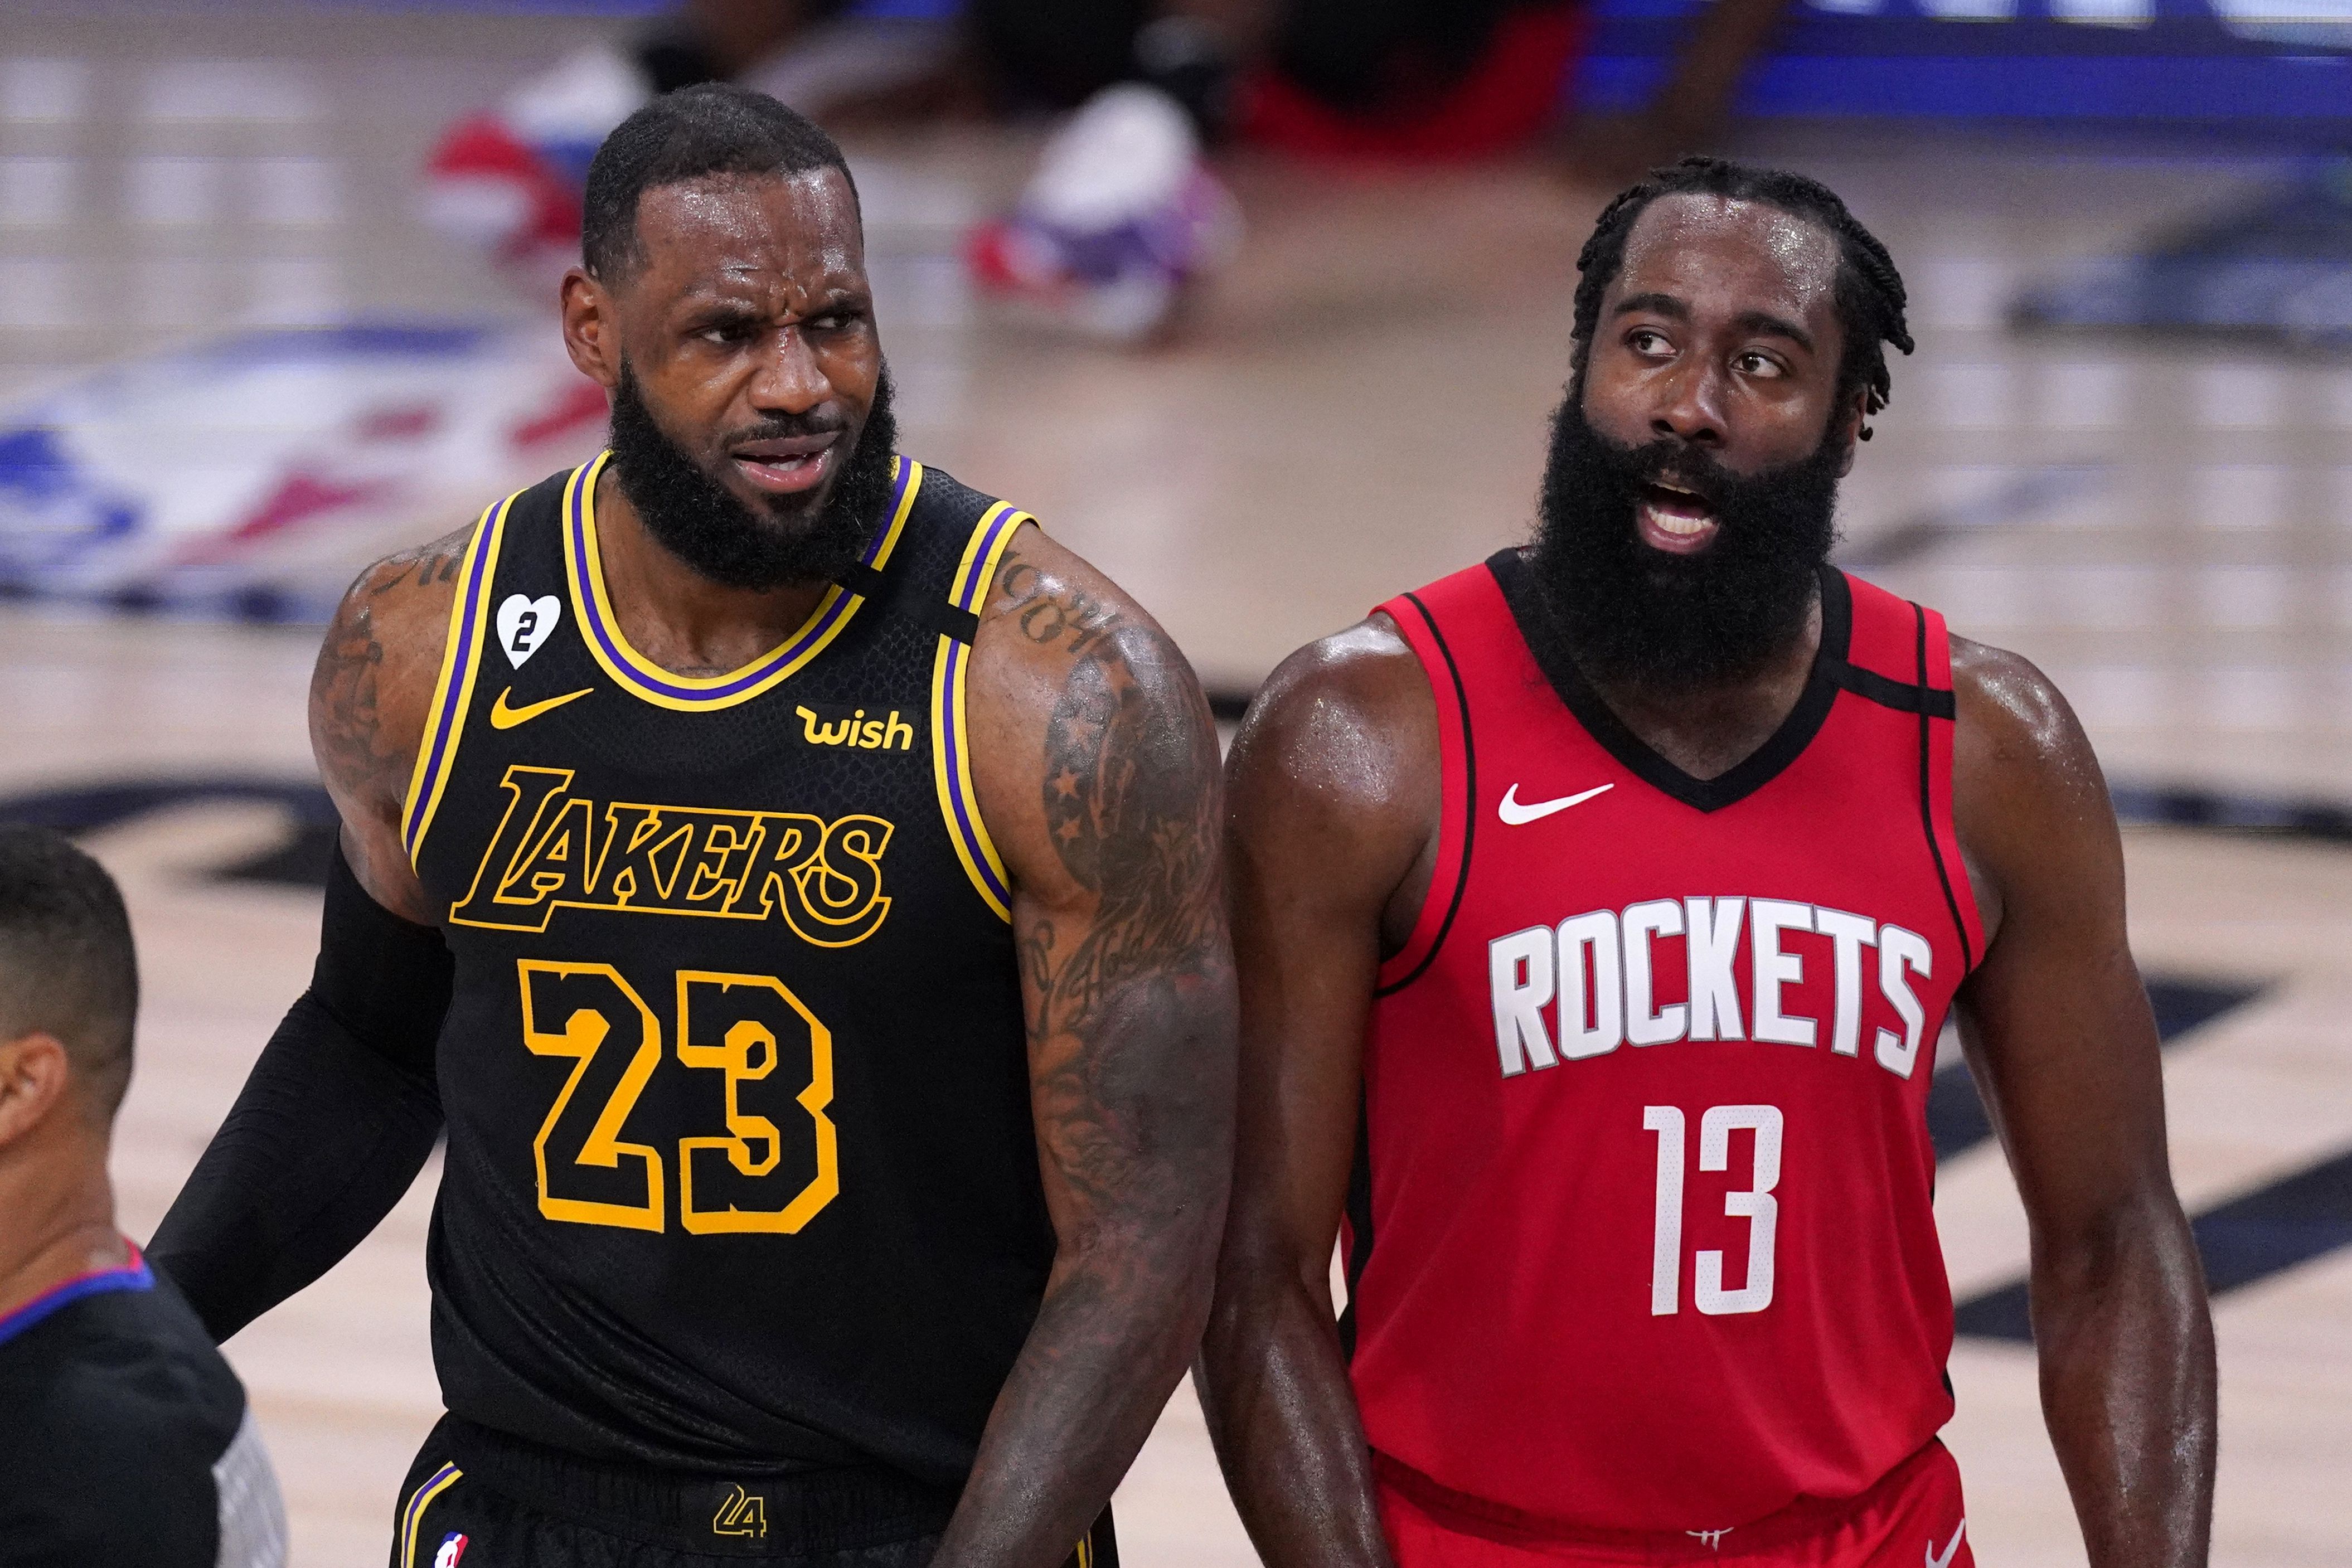 Lakers Vs Rockets Live Stream 9 8 How To Watch Nba Playoffs Online Tv Time Al Com